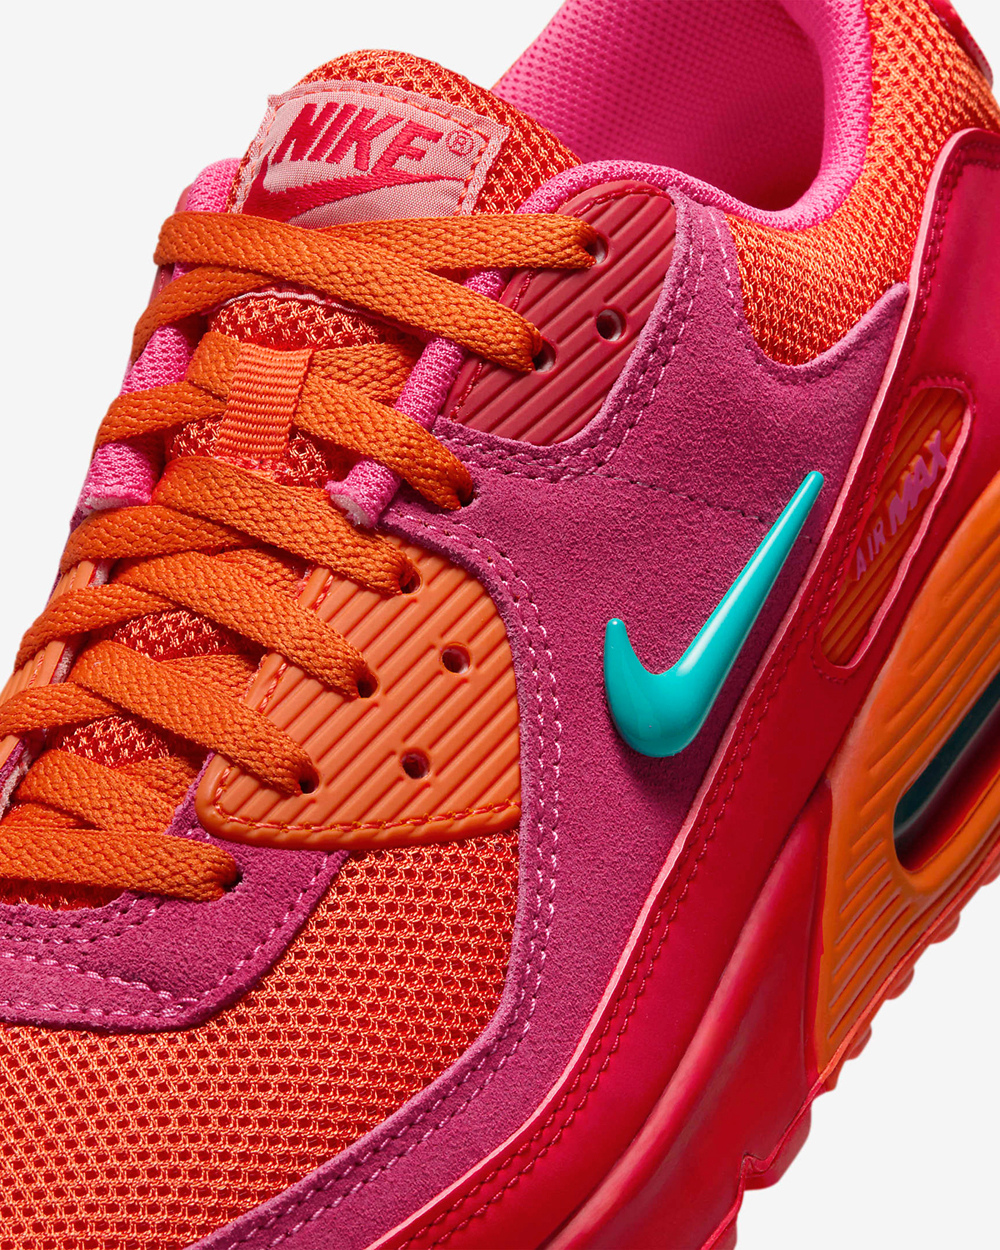 Nike-Air-Max-90-Alchemy-Pink-Cosmic-Clay-Fire-Red-Dusty-Cactus-Release-Date-6